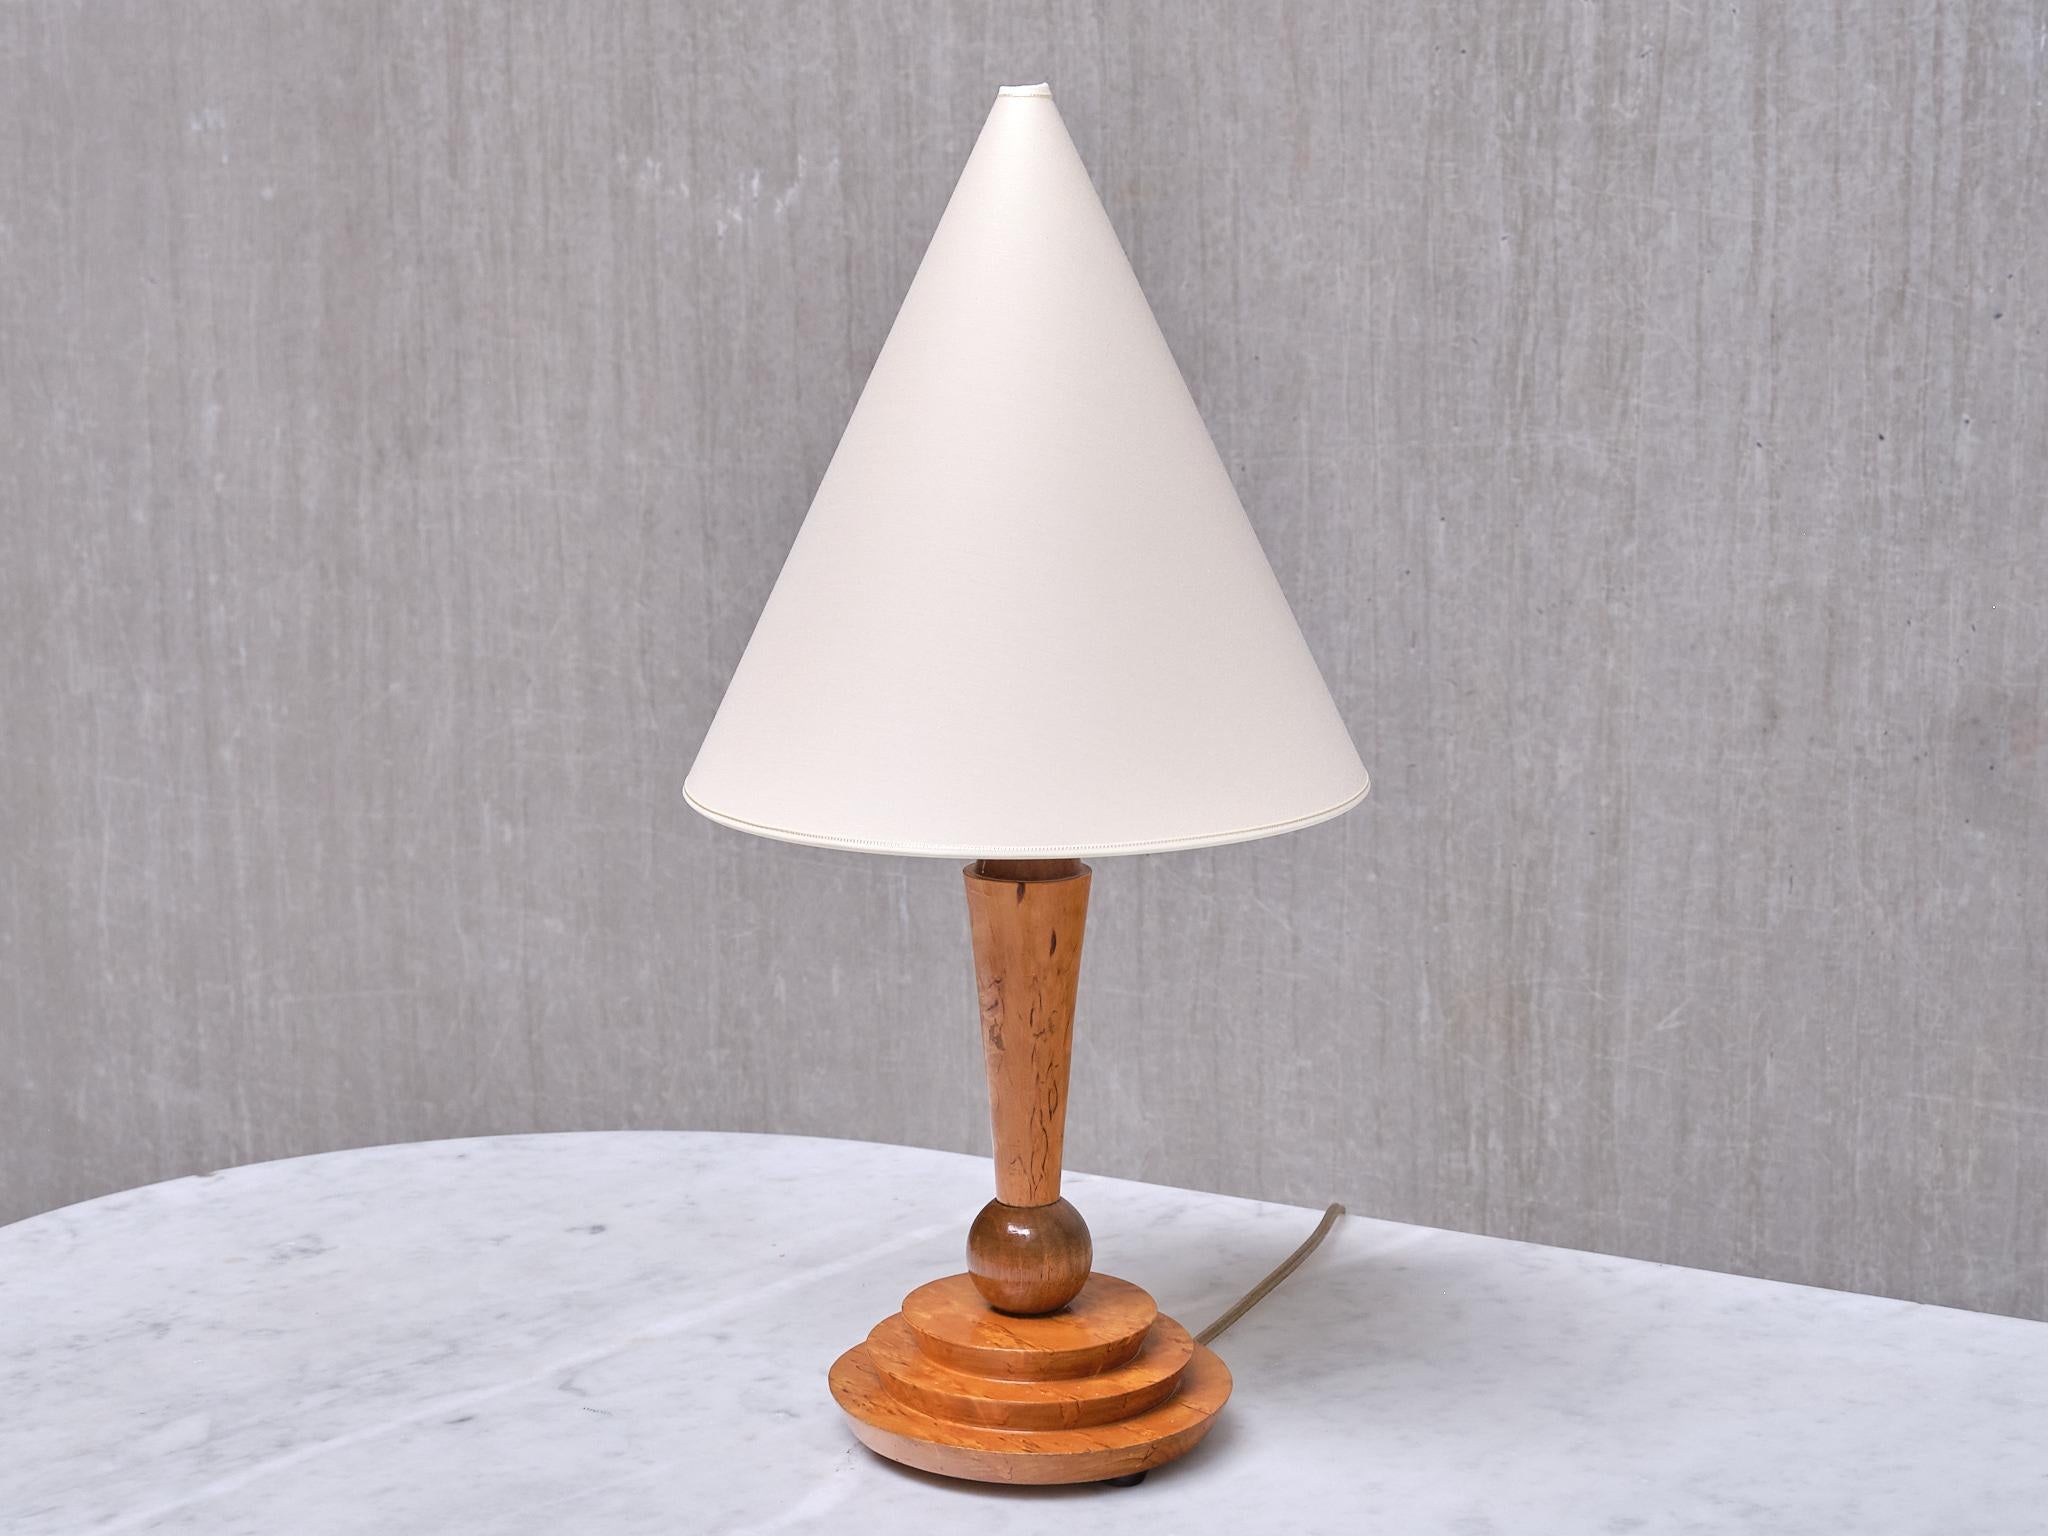 Art Deco Table Lamp in Birdseye Maple with Ivory Colored Shade, Austria, 1930s For Sale 5